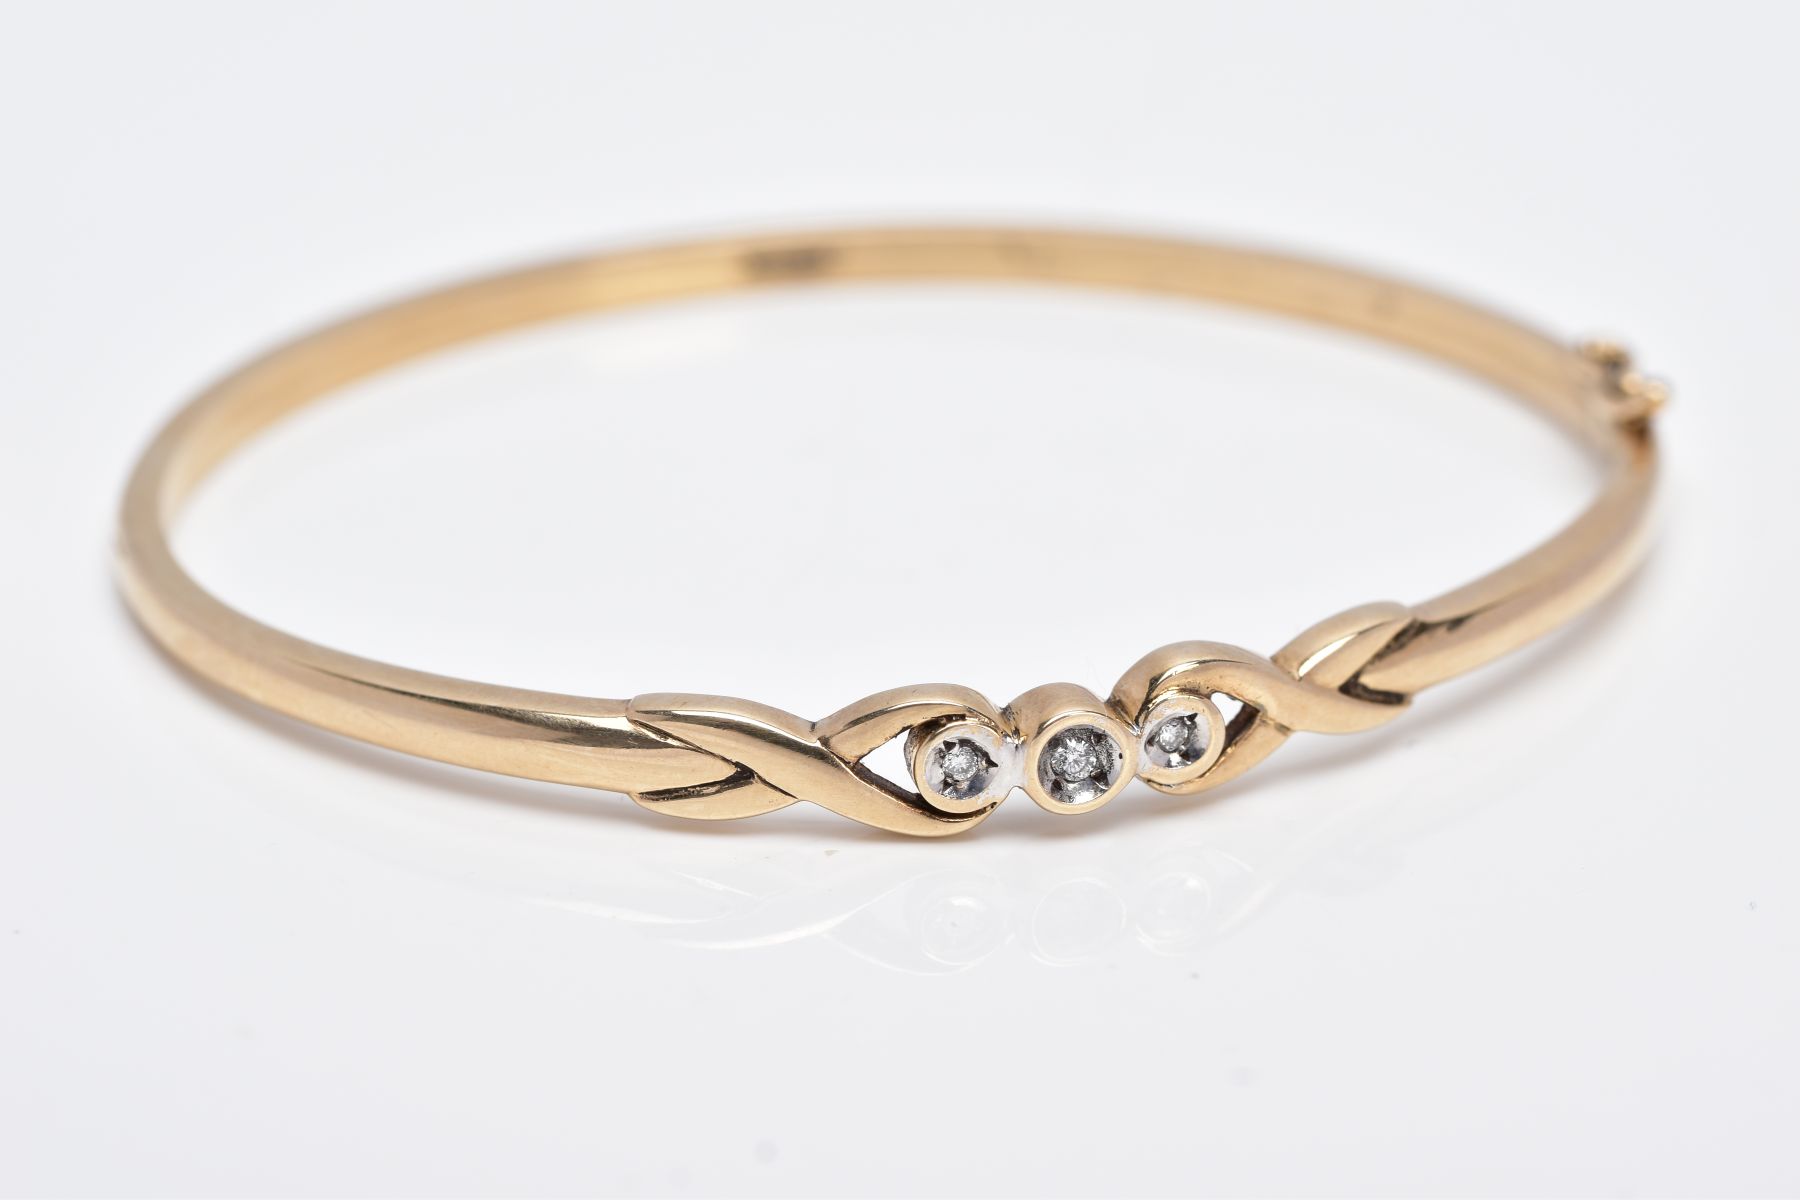 A 9CT GOLD DIAMOND BANGLE, designed with a crossover section set with three round brilliant cut